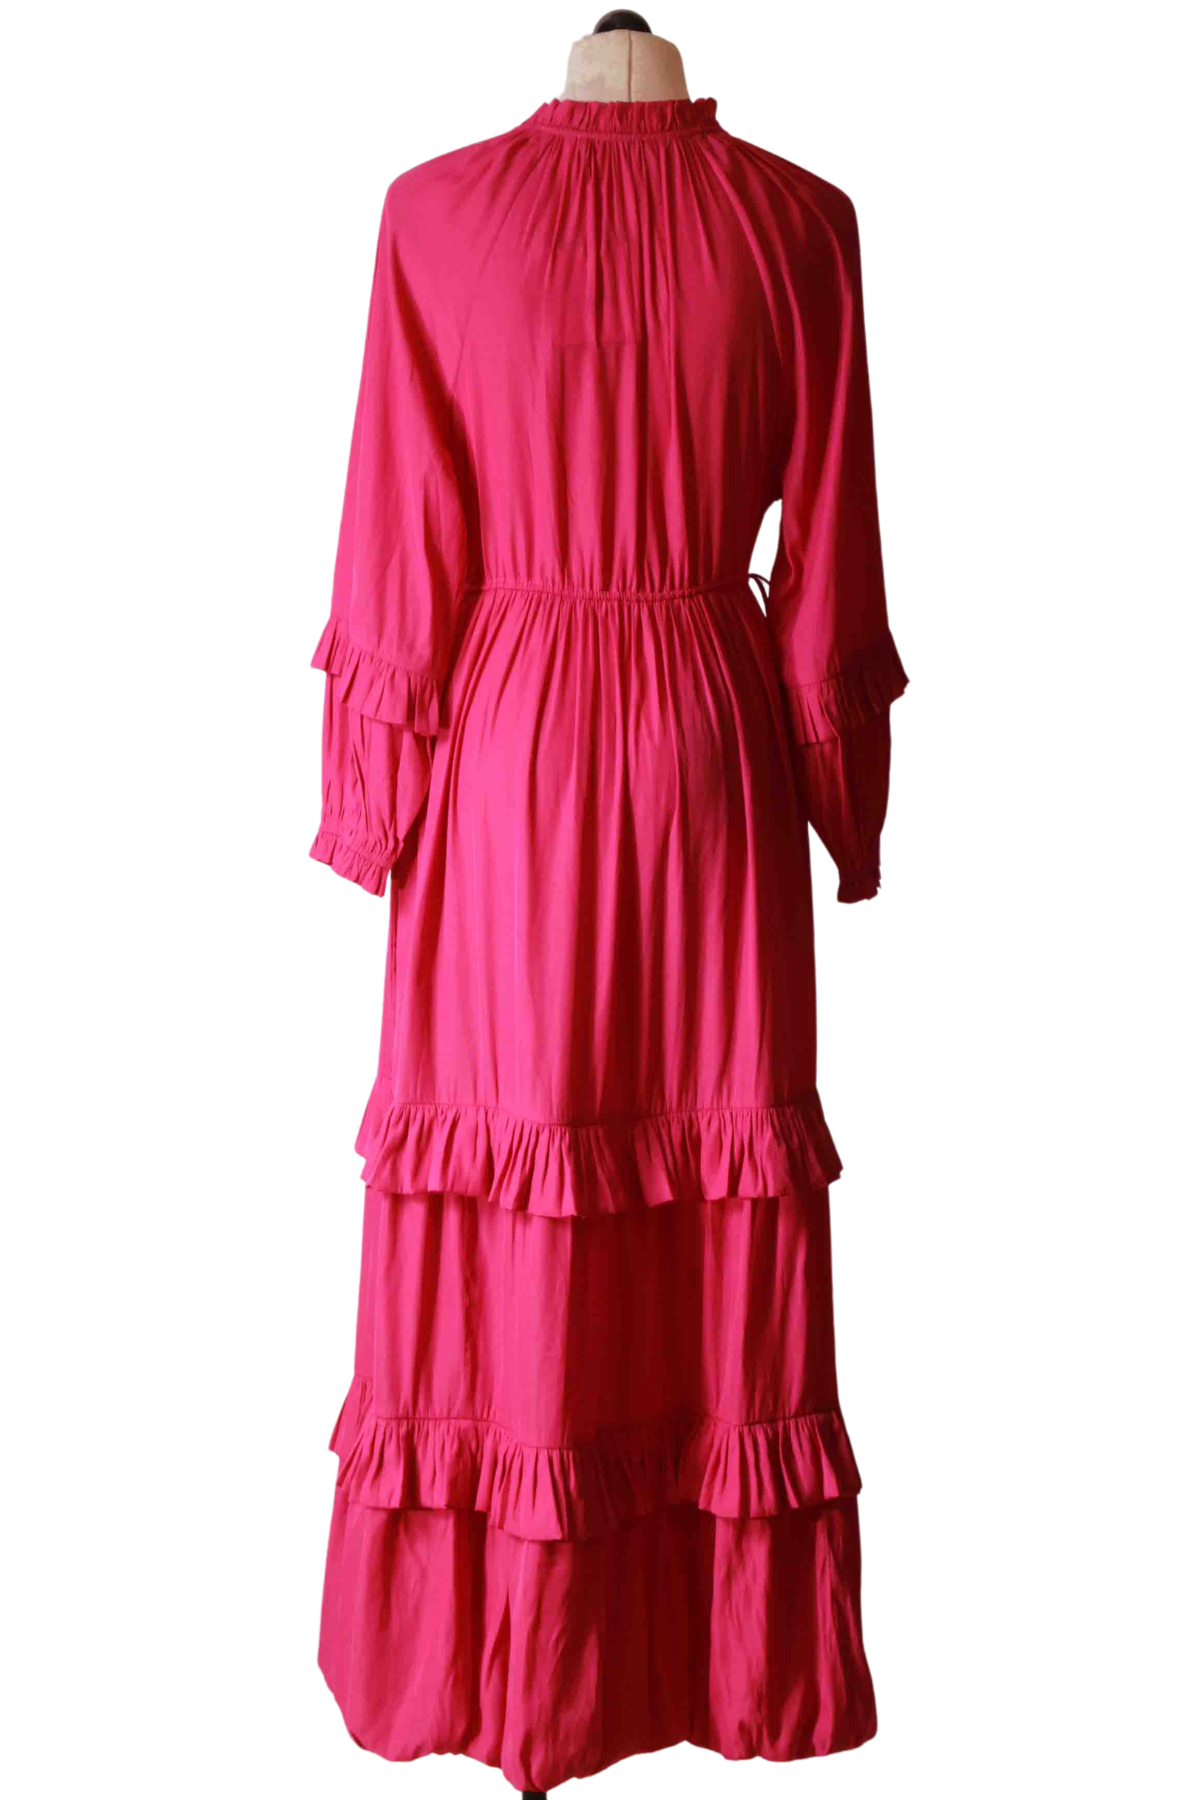 back view of Raspberry Maxi Length Ruffle Cove Dress by Marie Oliver